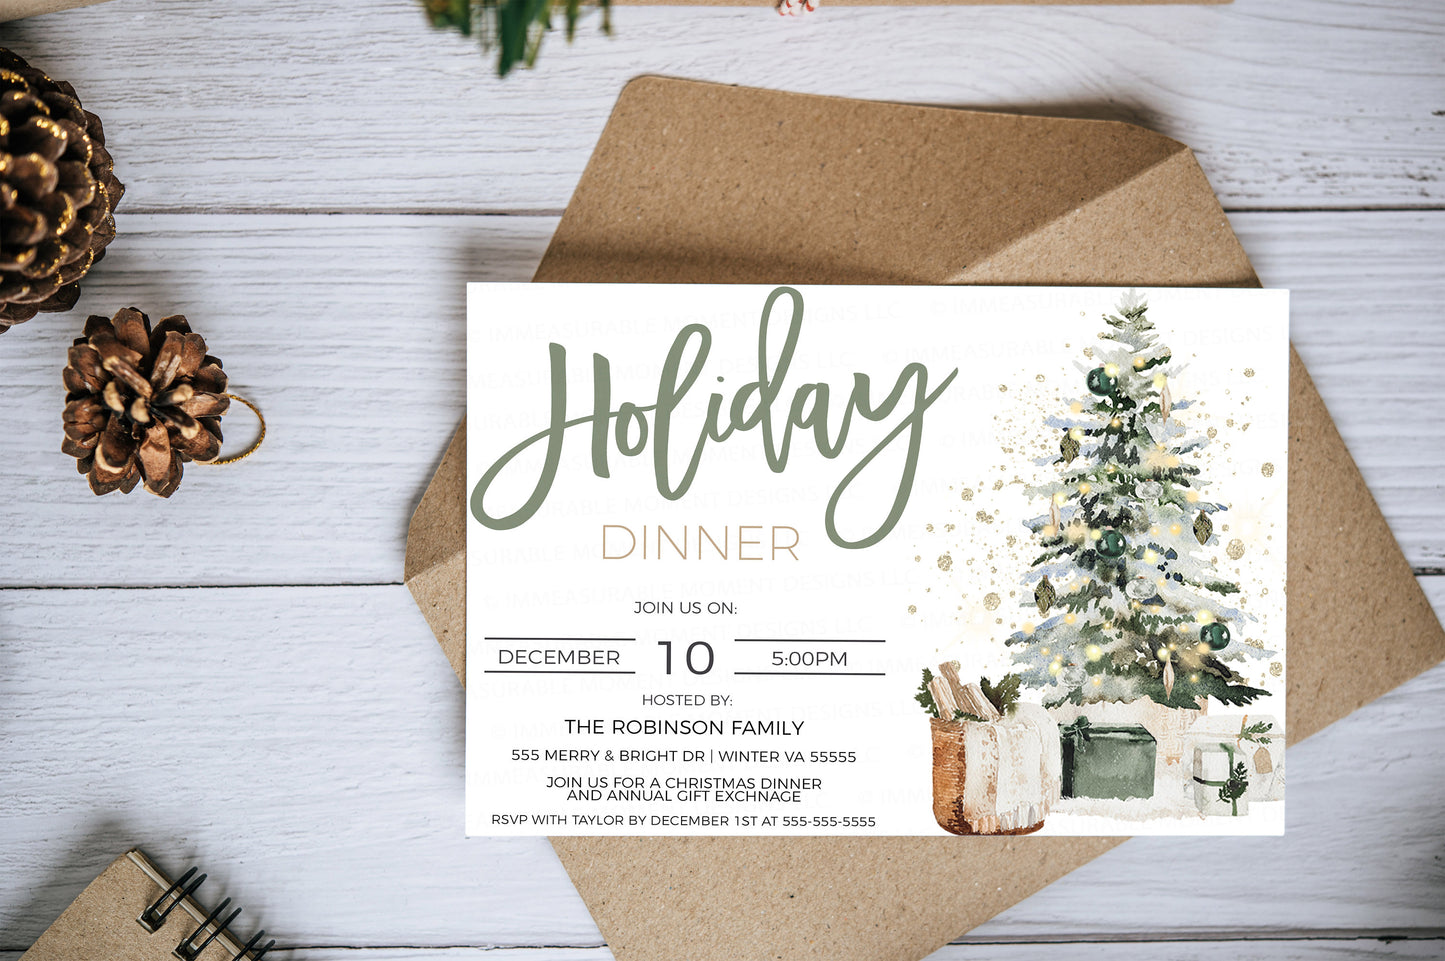 Editable Holiday Party Invitation, Brunch Lunch Dinner Breakfast Invite, Christmas Business Company Staff Employee Friends Family, Printable